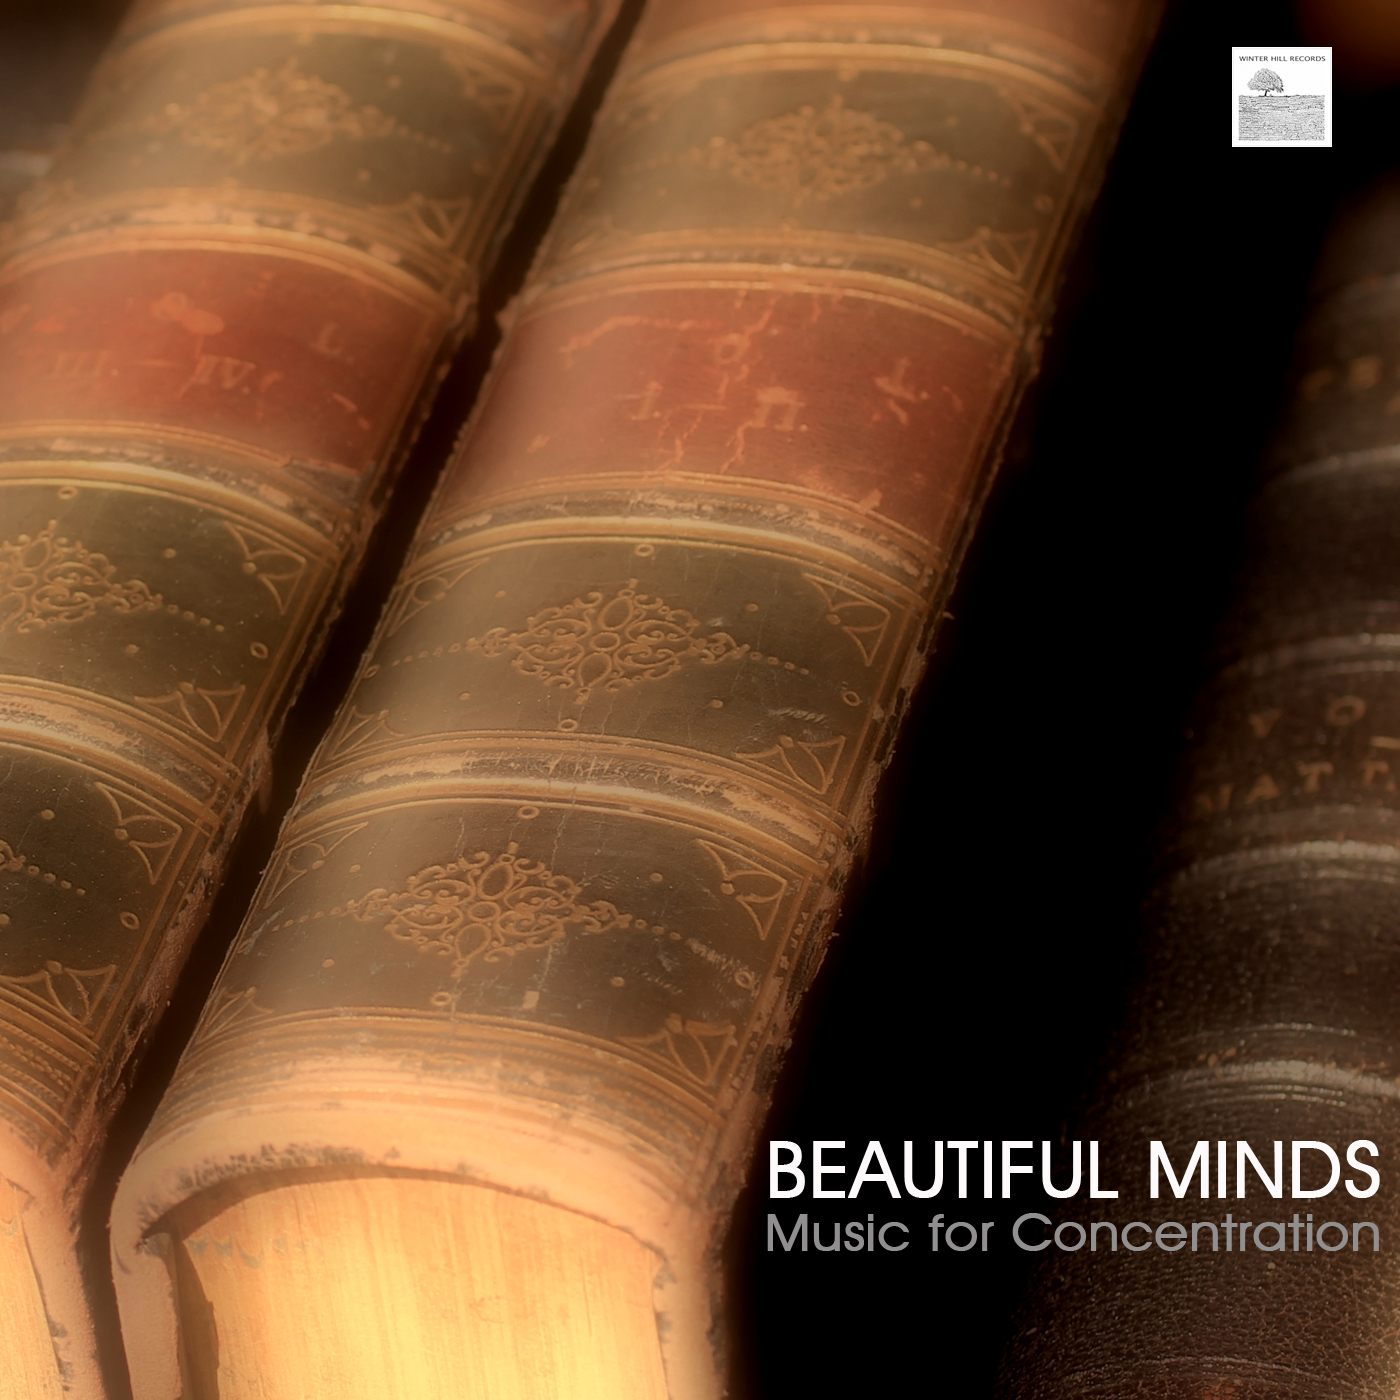 An Education - Music to Think Clearly